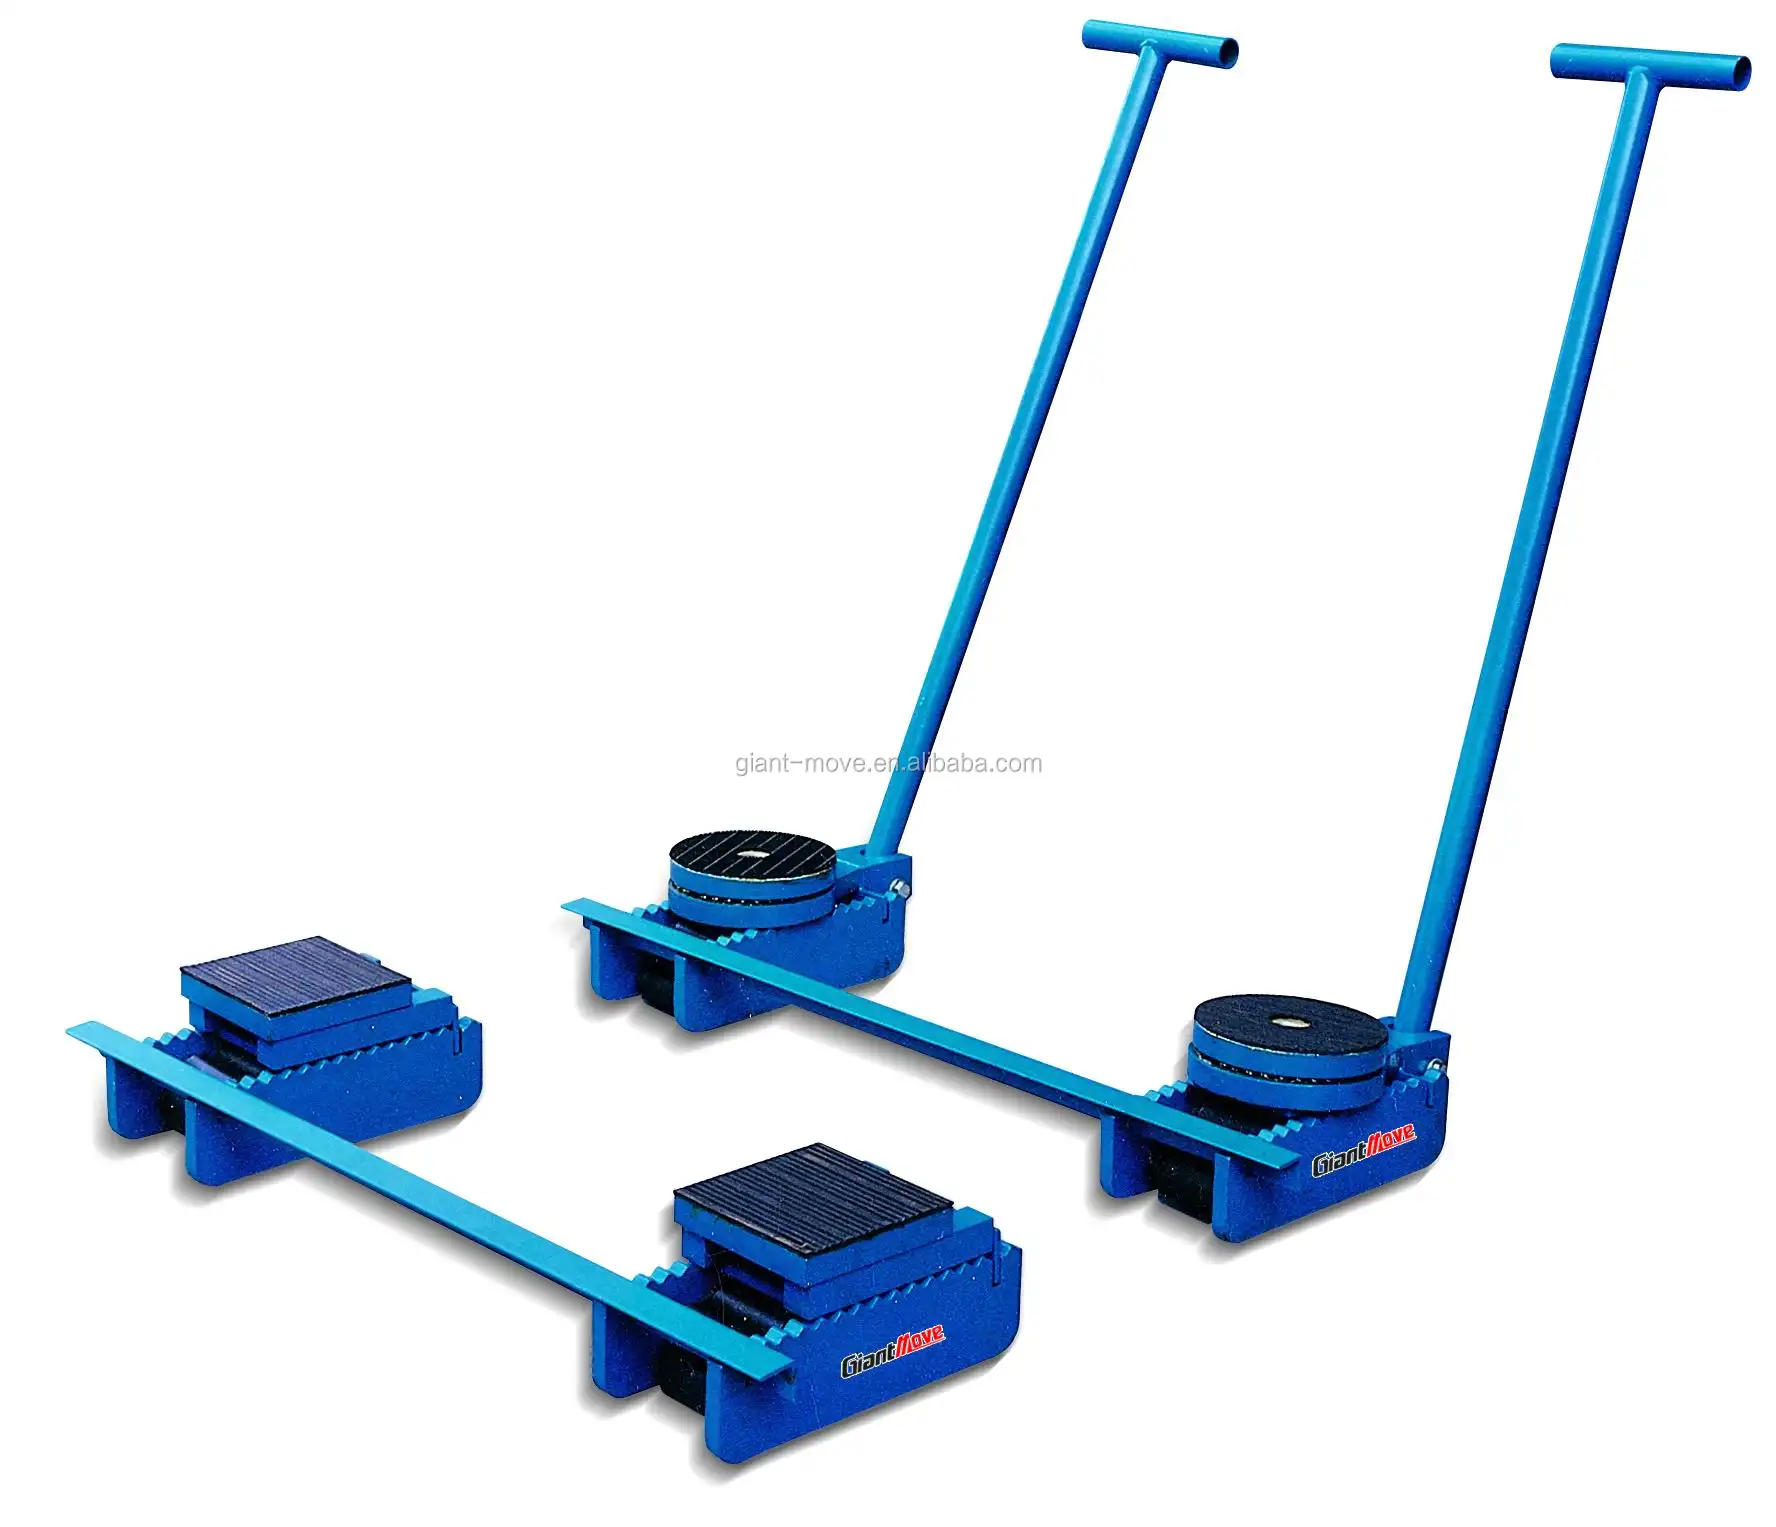 Heavy Load Moving Equipment Moving Dolly Skid Roller, Complete Roller Skate Kits Transport Trolley